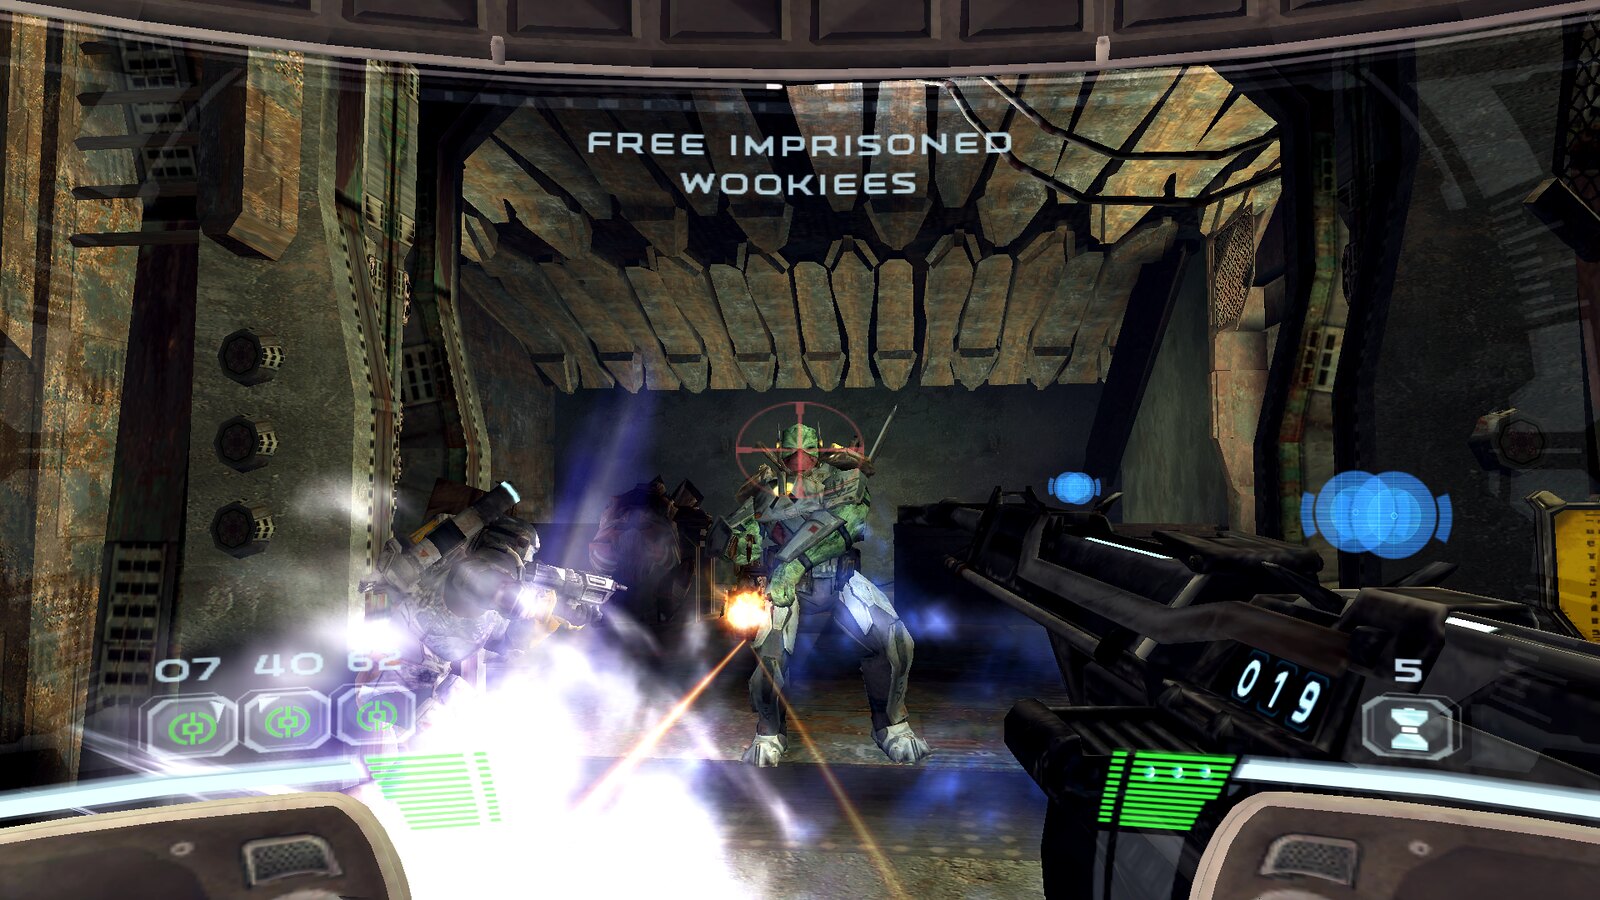 Star Wars Republic Commando launches on PS4 this April